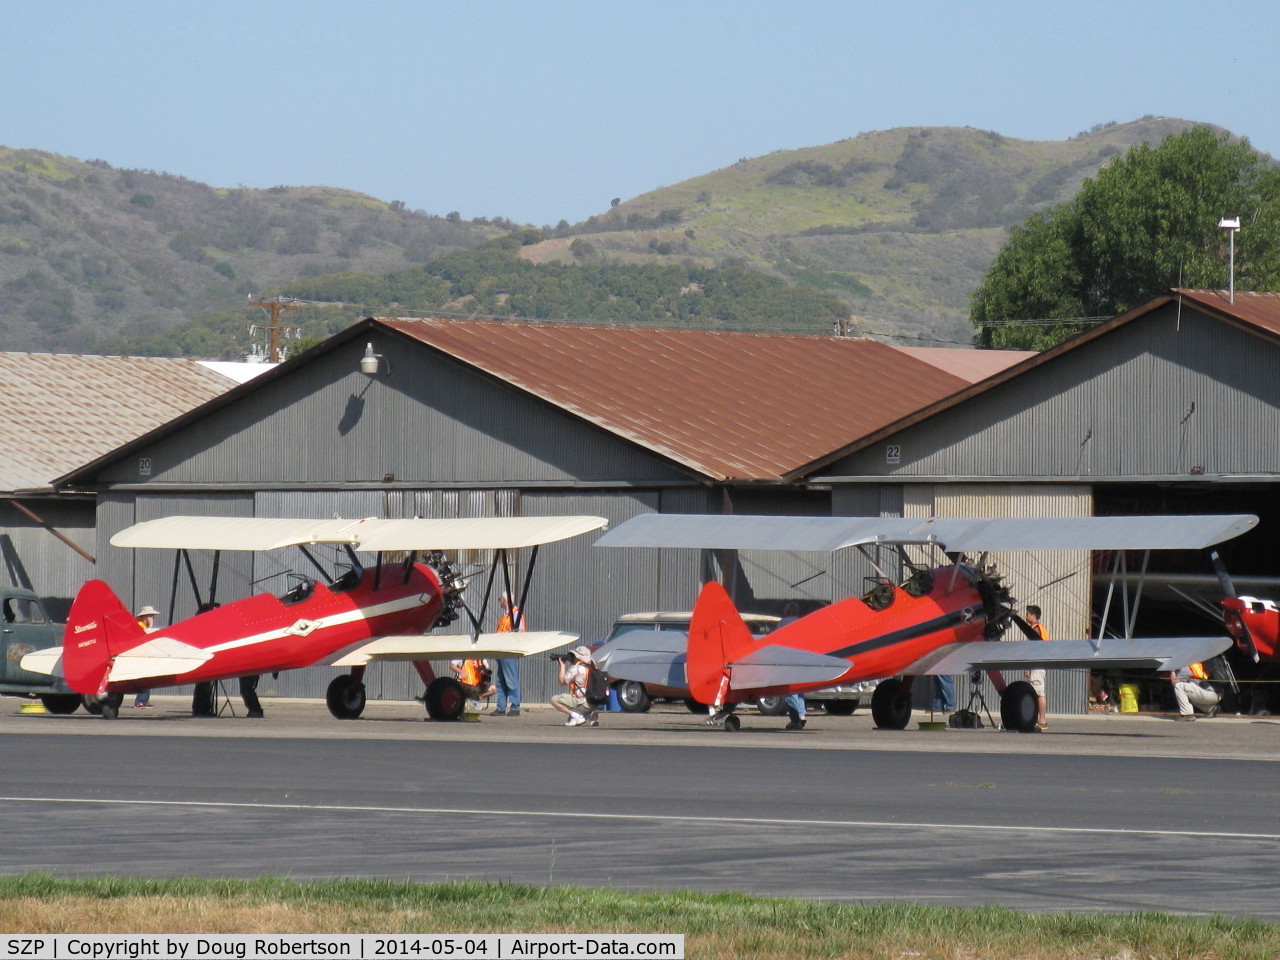 Santa Paula Airport (SZP) - Aviation Museum of Santa Paula 1st Sunday display day-Two Boeing Stearmans recovered and refinished by Rowena's Flying Fabric Co., at her ramp